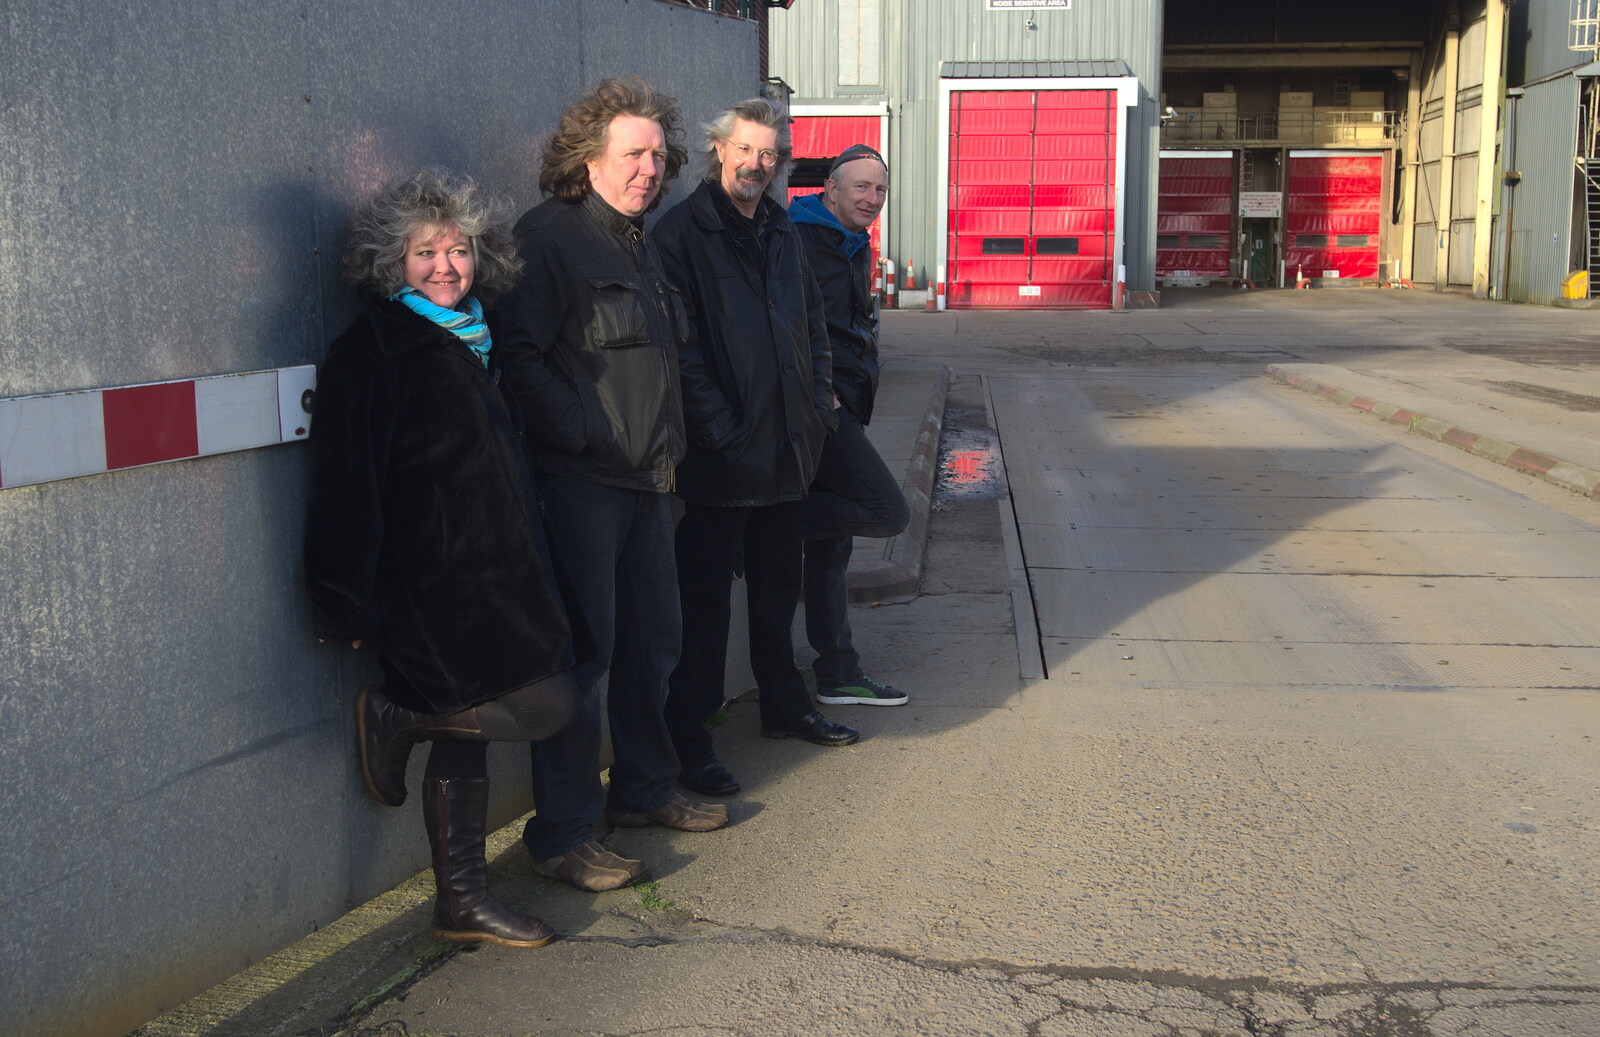 The band lean on a galvanised gate from The BBs Photo Shoot, BOCM Pauls Pavilion, Burston, Norfolk - 12th January 2014